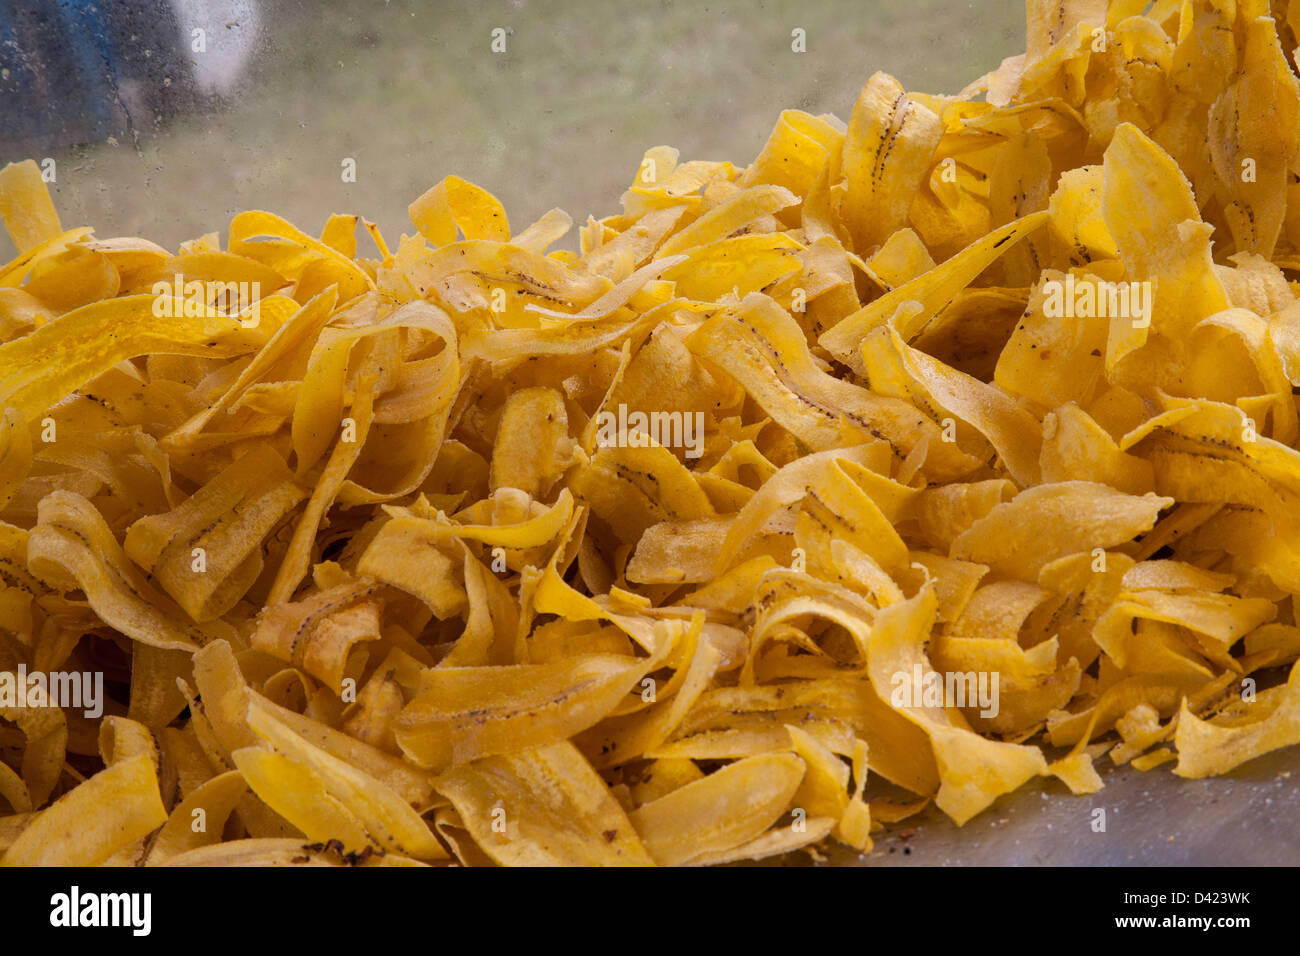 A pile of fried plantain chips. Stock Photo